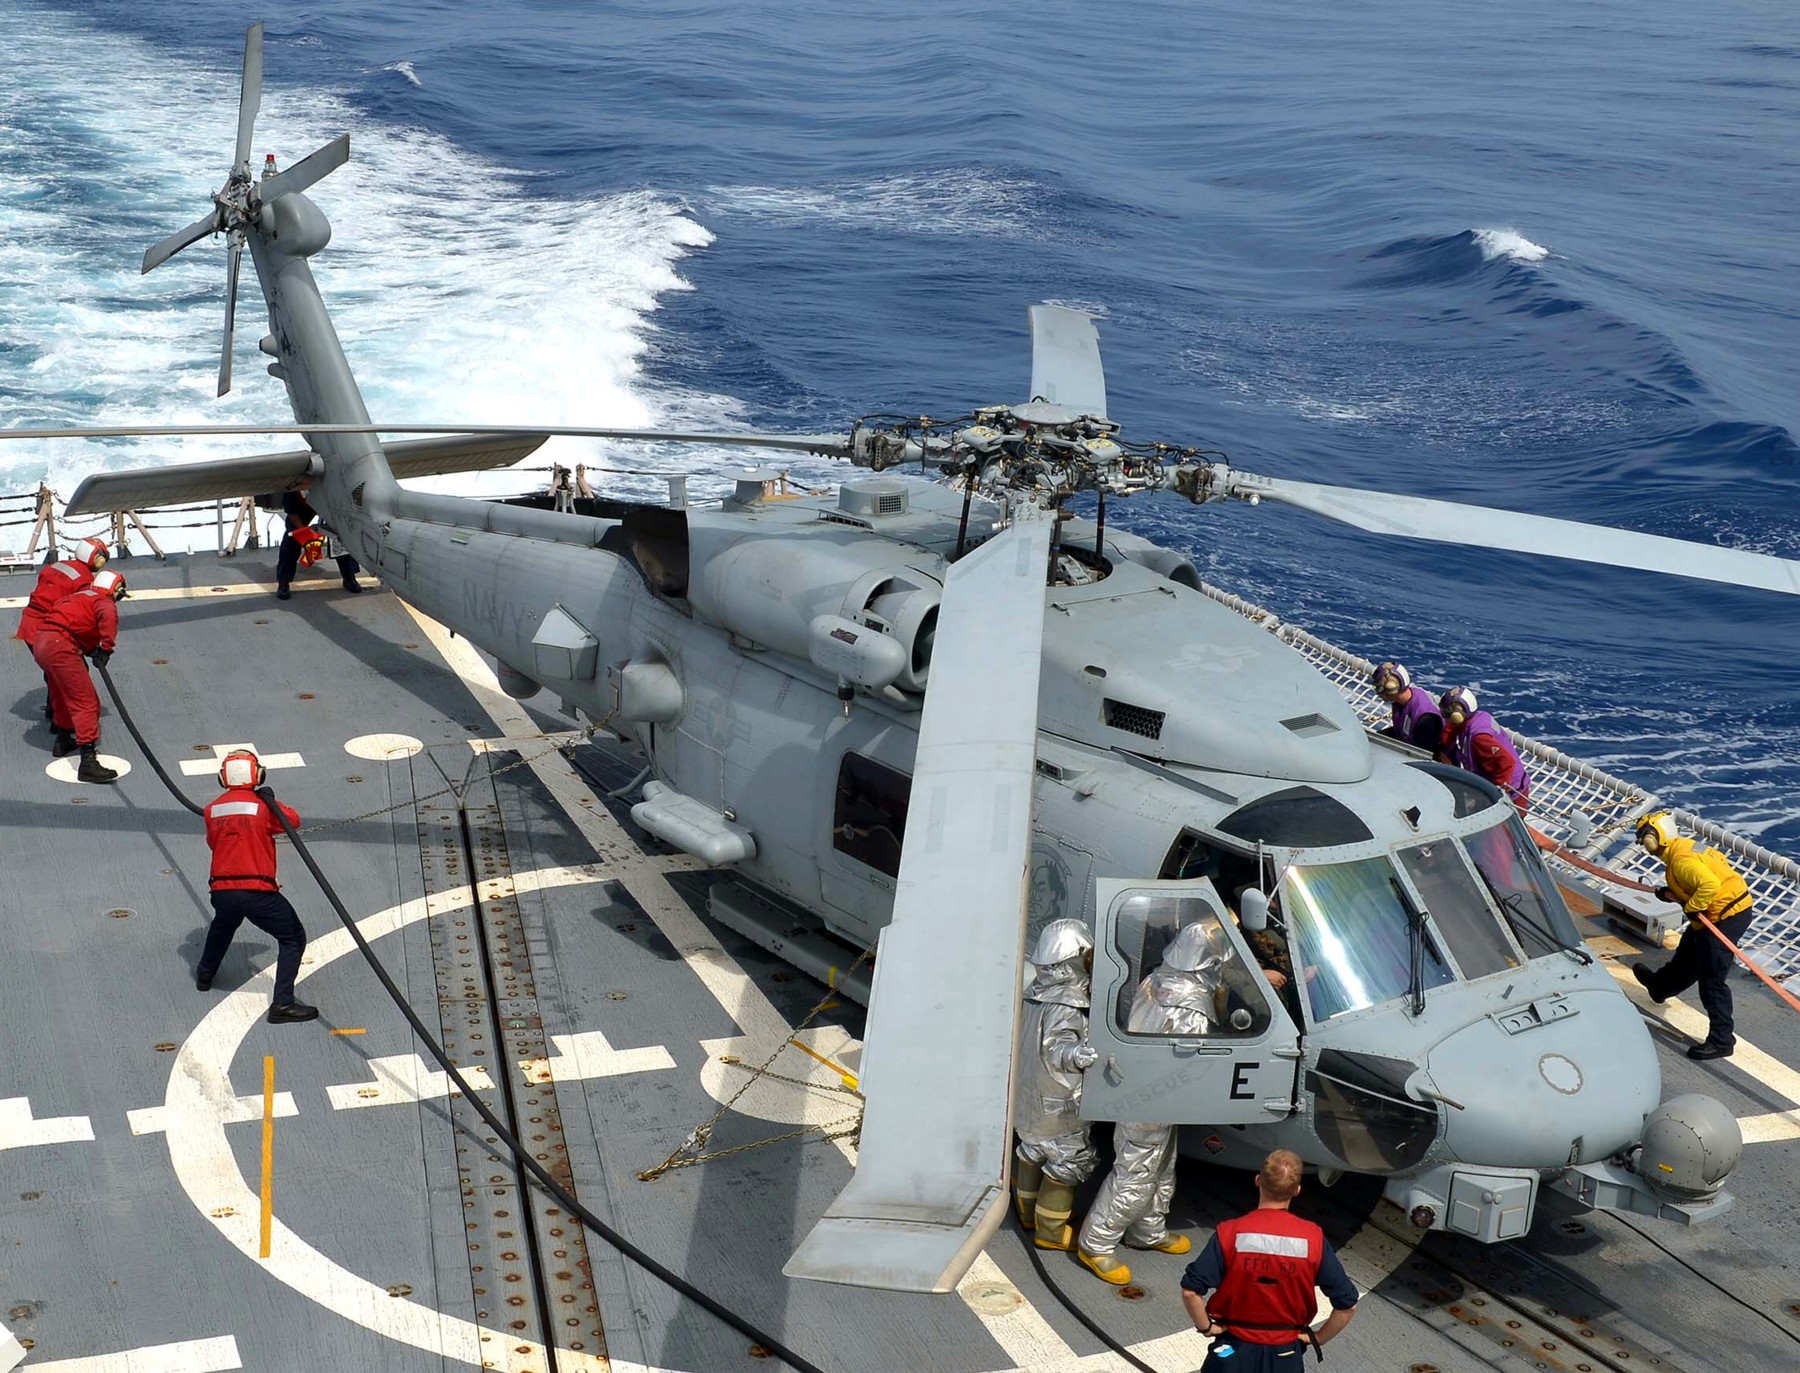 hsm-51 warlords helicopter maritime strike squadron mh-60r seahawk navy 2014 20 uss rodney m. davis ffg-60